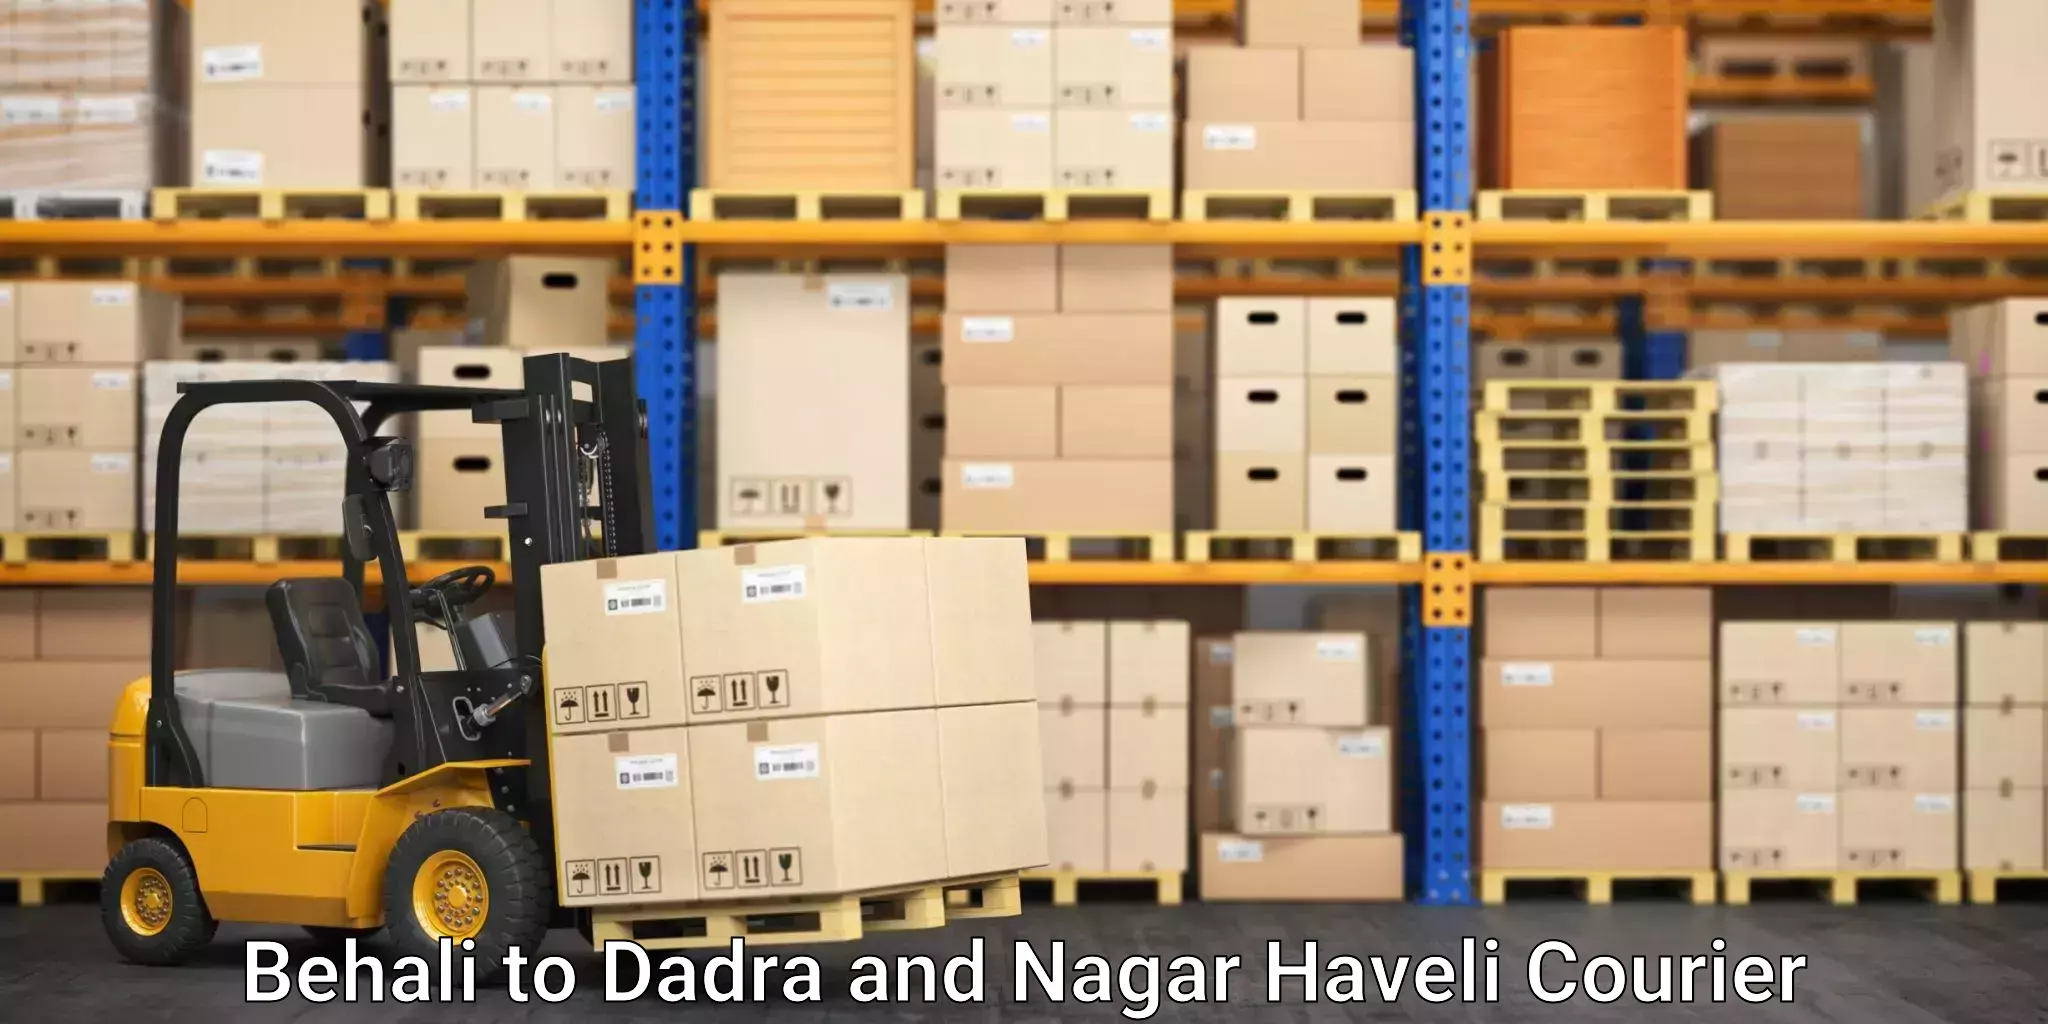 Reliable parcel services in Behali to Dadra and Nagar Haveli